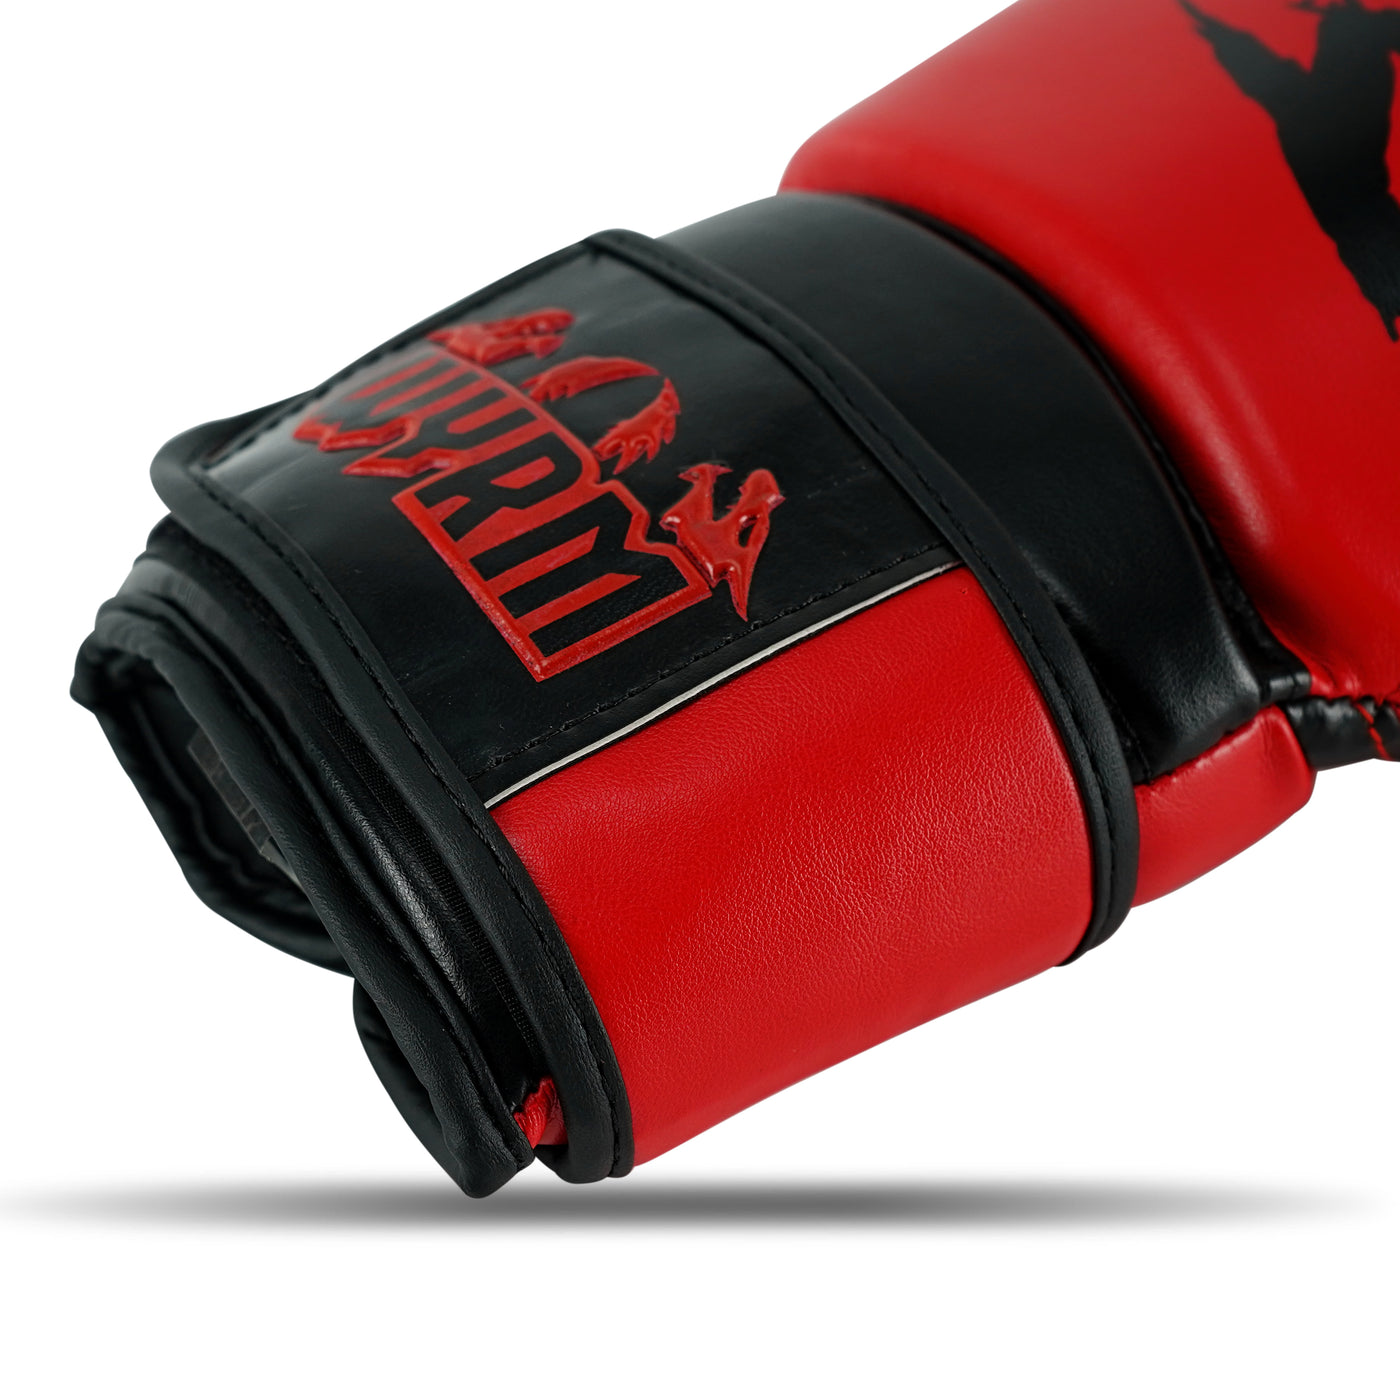 Matador Red/Black Leather Boxing Gloves